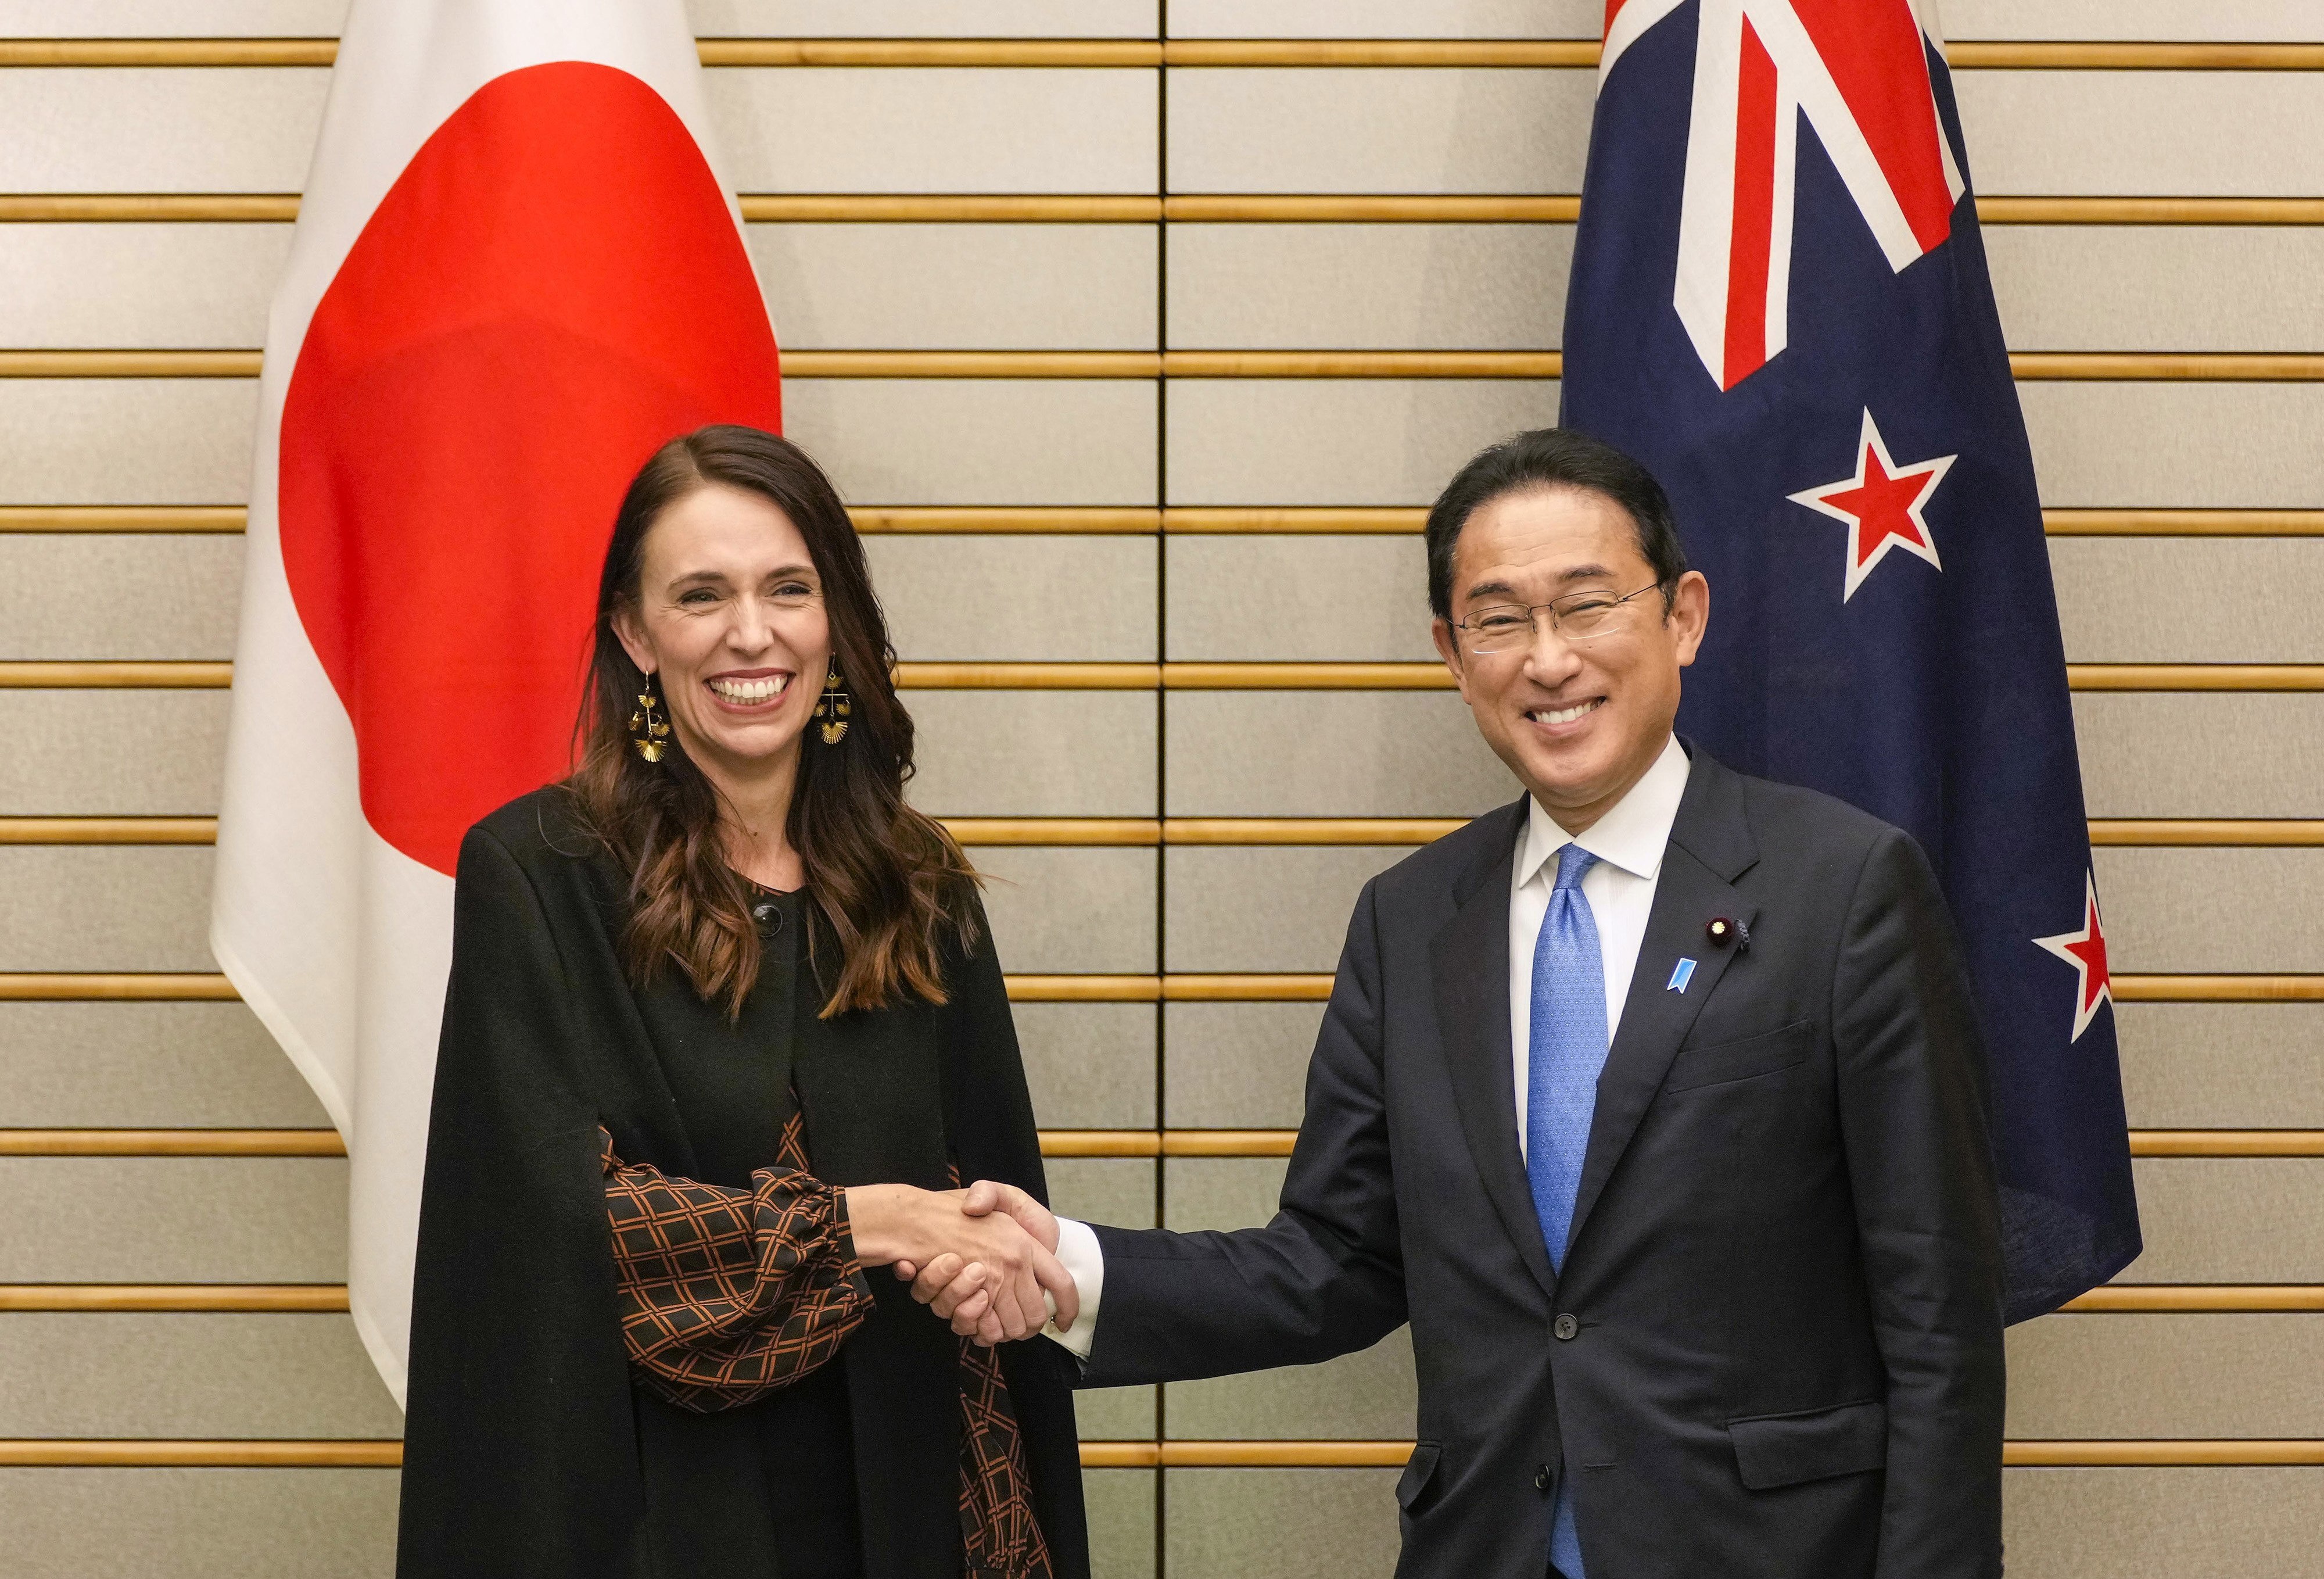 New Zealand’s Prime Minister Jacinda Ardern (L) and her Japanese counterpart Fumio Kishida (R) shake hands of the prime minister’s official residence in Tokyo, Japan on Thursday. Photo: EPA-EFE